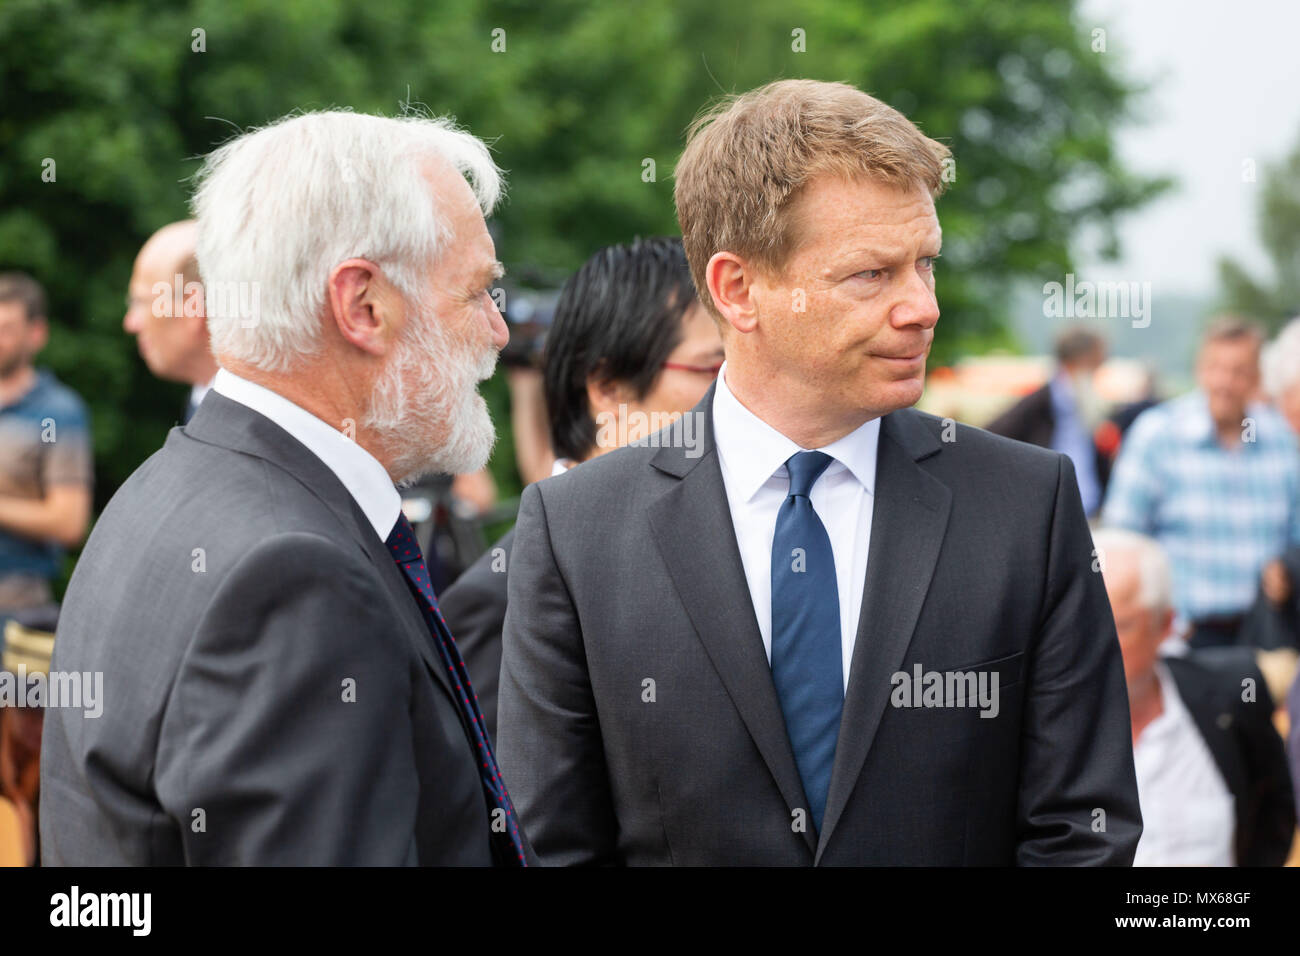 Eschede, Germany. 03 May 2018, Germany, Eschede: The spokesman from 'Selbsthilfe Eschede' (lit. self-help Eschede', Heinrich Loewen, and Chairman of the Deutsch Bahn, Richard Lutz, after the memorial event for the 20th anniversary of the train accident in Eschede. The ICE 'Wilhelm Conrad Roentgen' derailed on the 3 June 1998 at tempo 200 and drove into a highway bridge. 101 people died. Photo: Philipp von Ditfurth/dpa Stock Photo